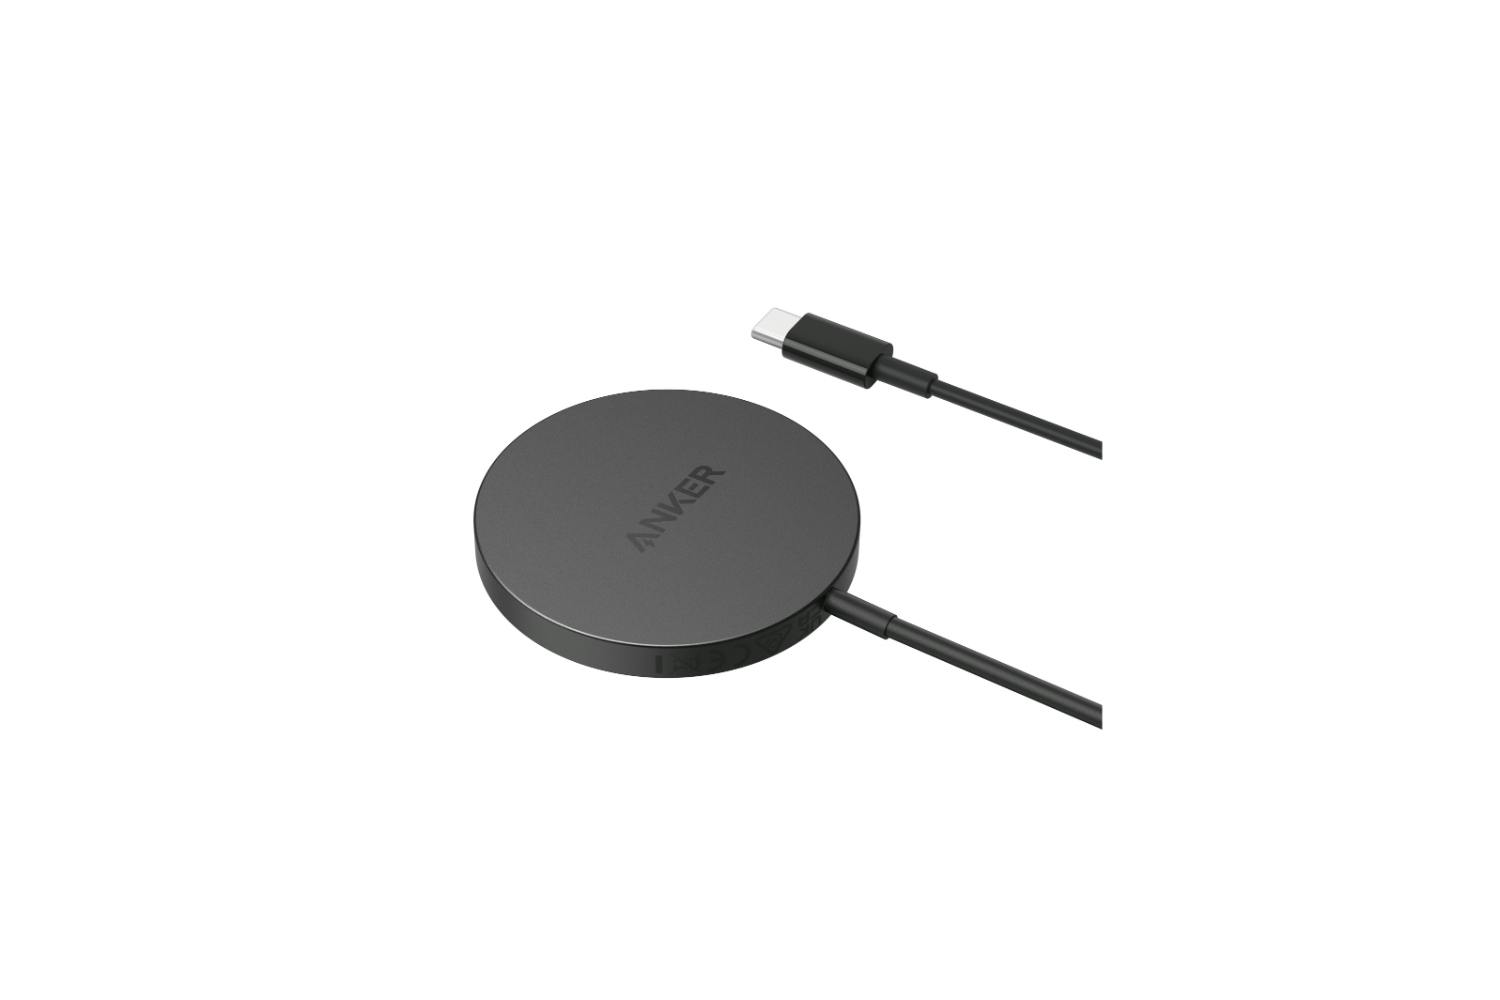 Anker Powerwave Select+ 7.5W Wireless Magnetic Charging Pad | Black